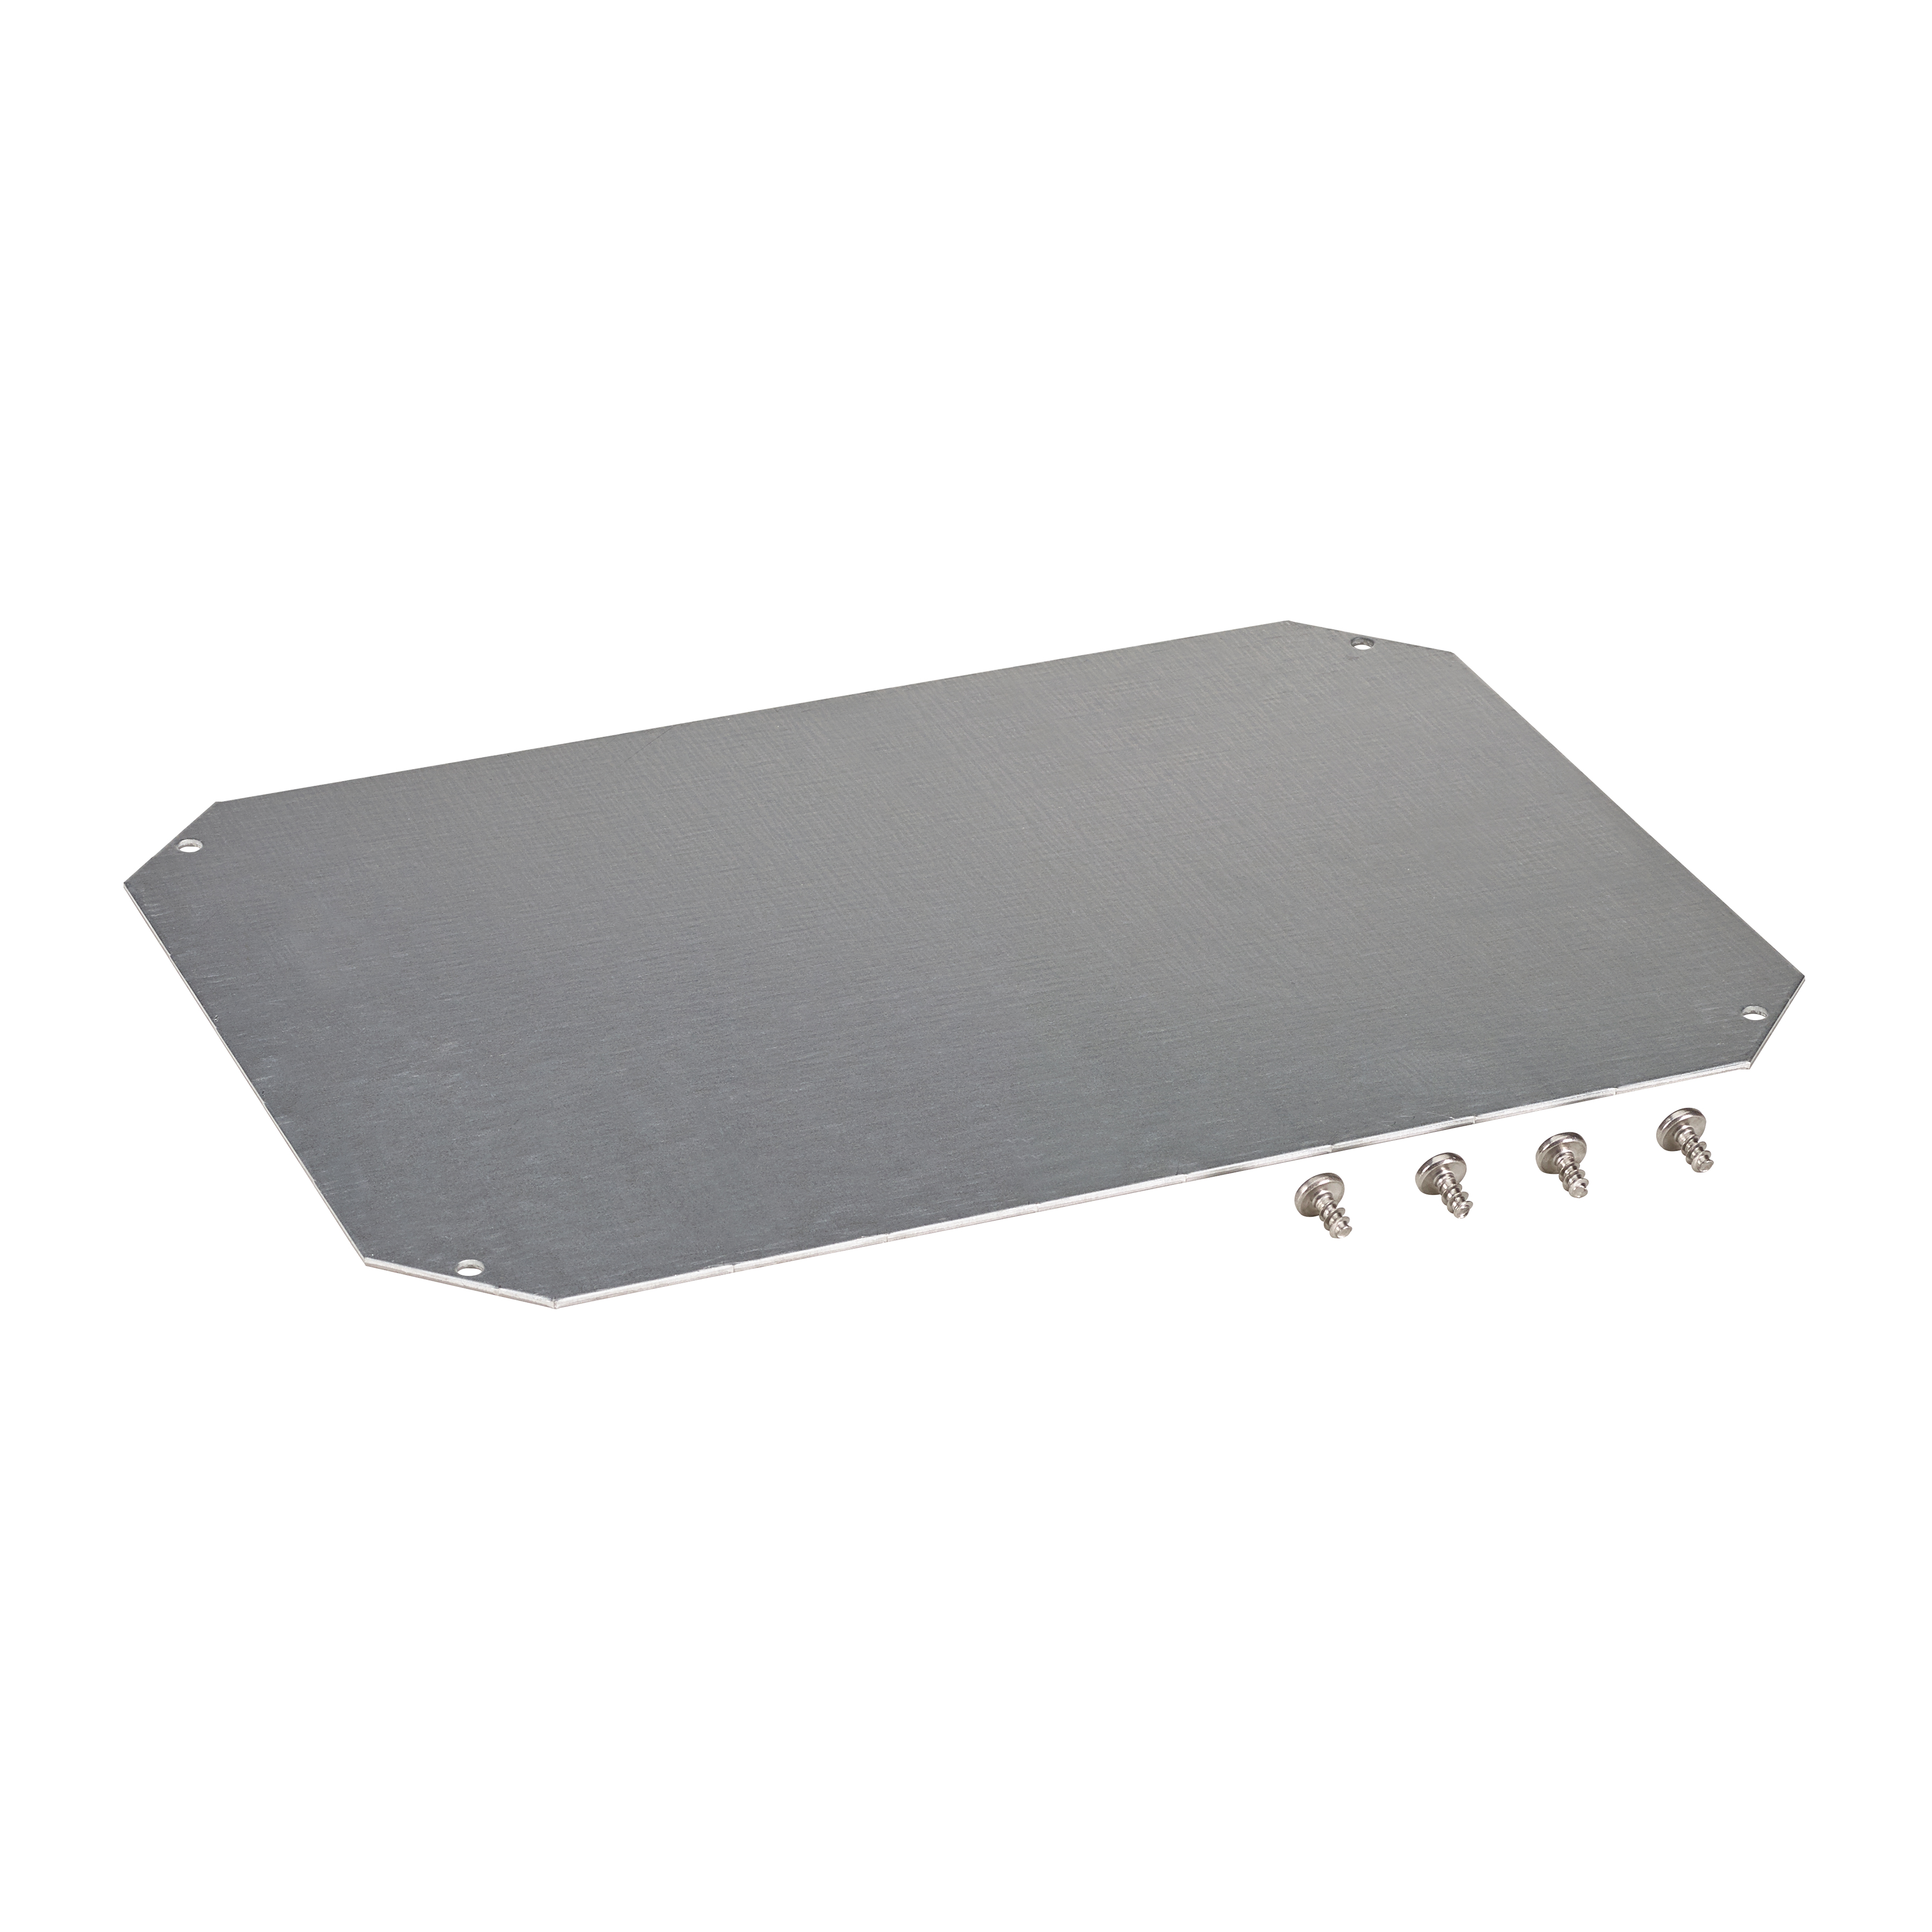 MPS ARCA 8060 Mounting Plate-Galvanized